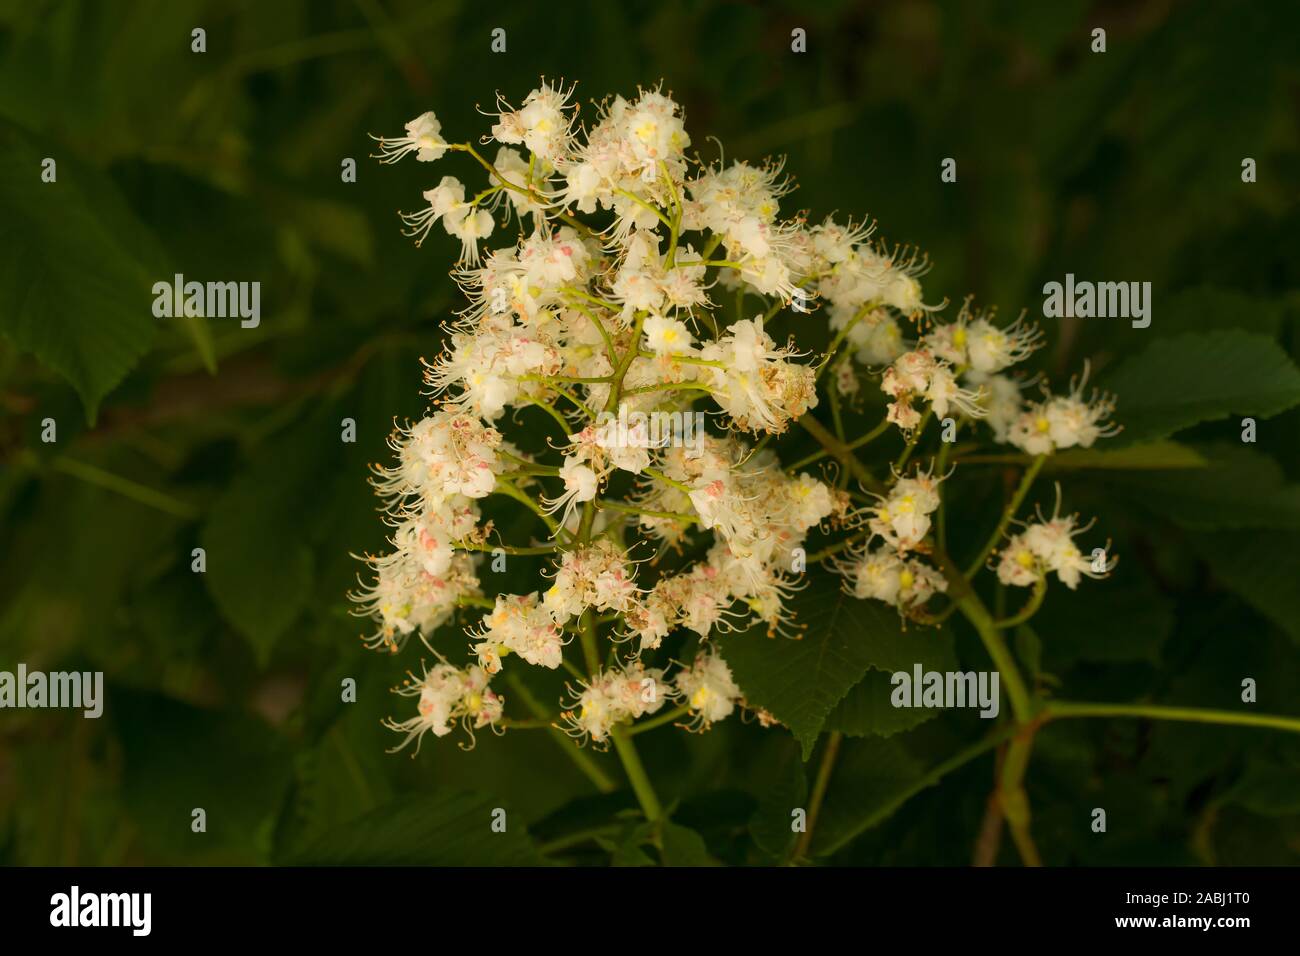 Flowering branches of chestnut (Aesculus hippocastanum) on the background of green leaves and tree bark Stock Photo